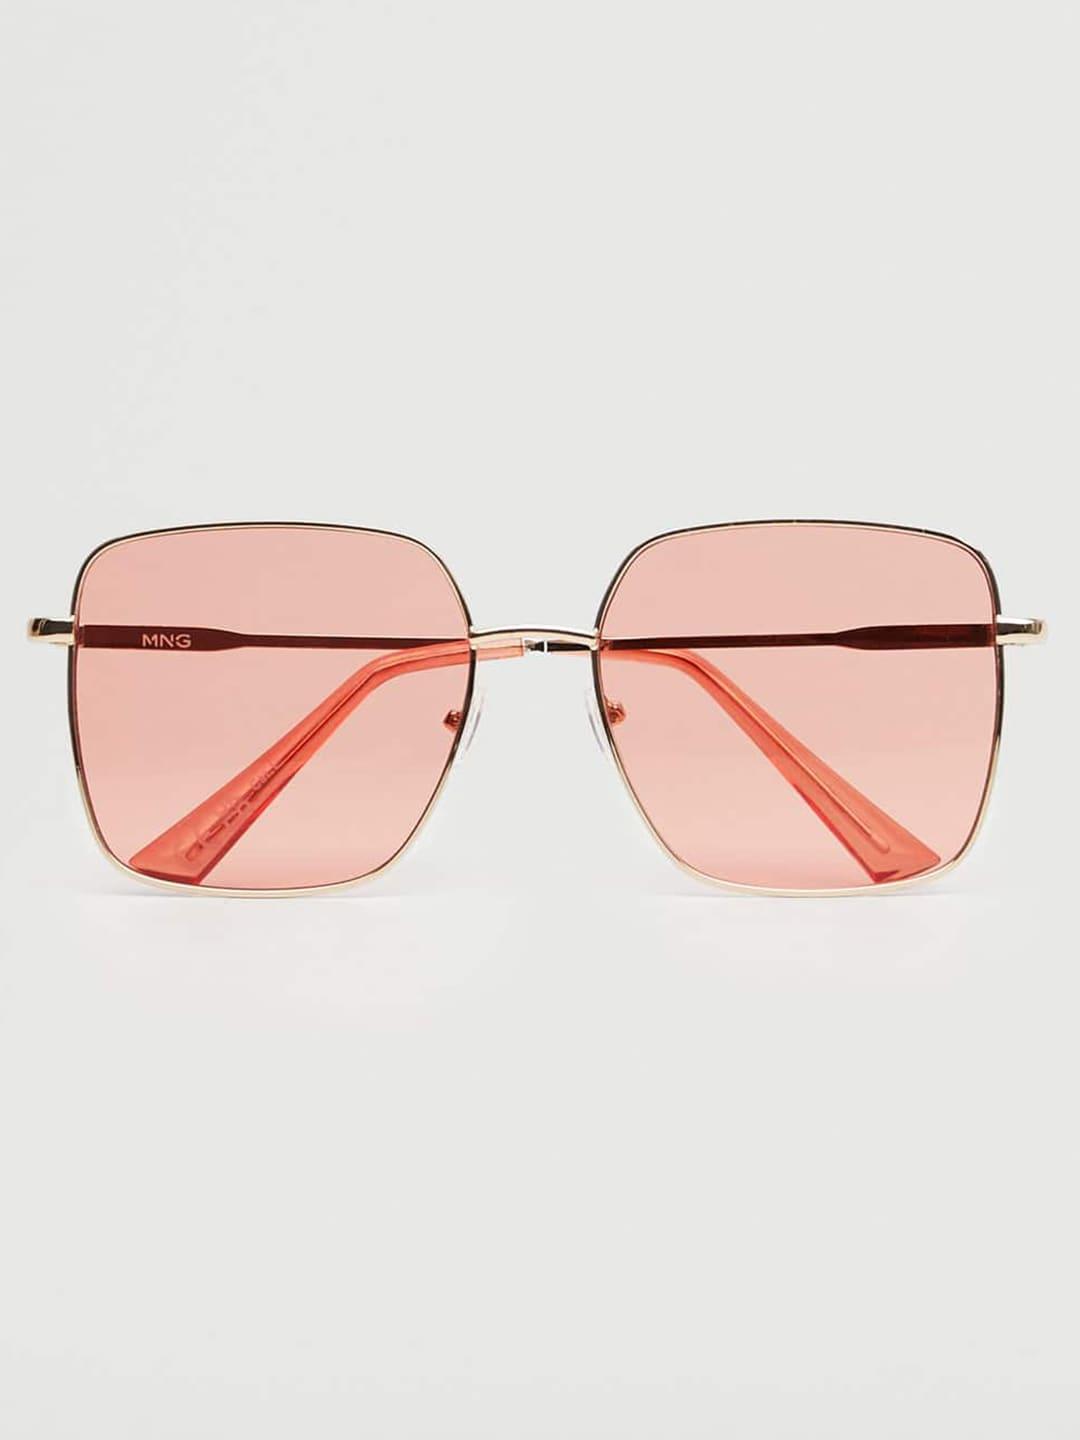 MANGO Women Pink Lens & Gold-Toned Rectangle Sunglasses with UV Protected Lens